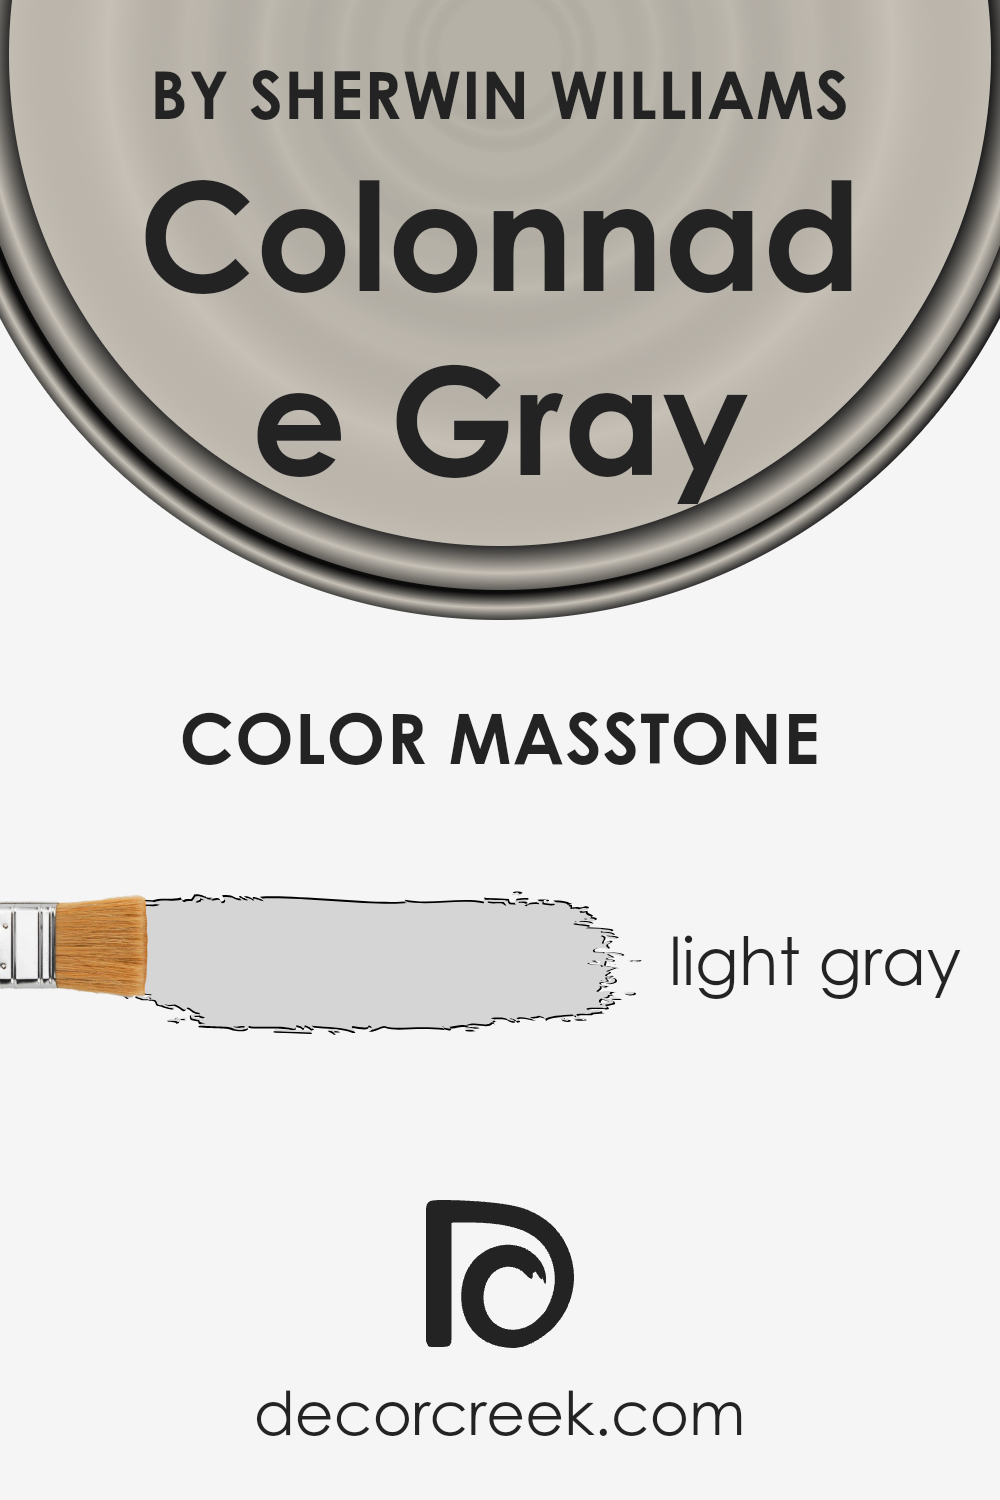 what_is_the_masstone_of_colonnade_gray_sw_7641